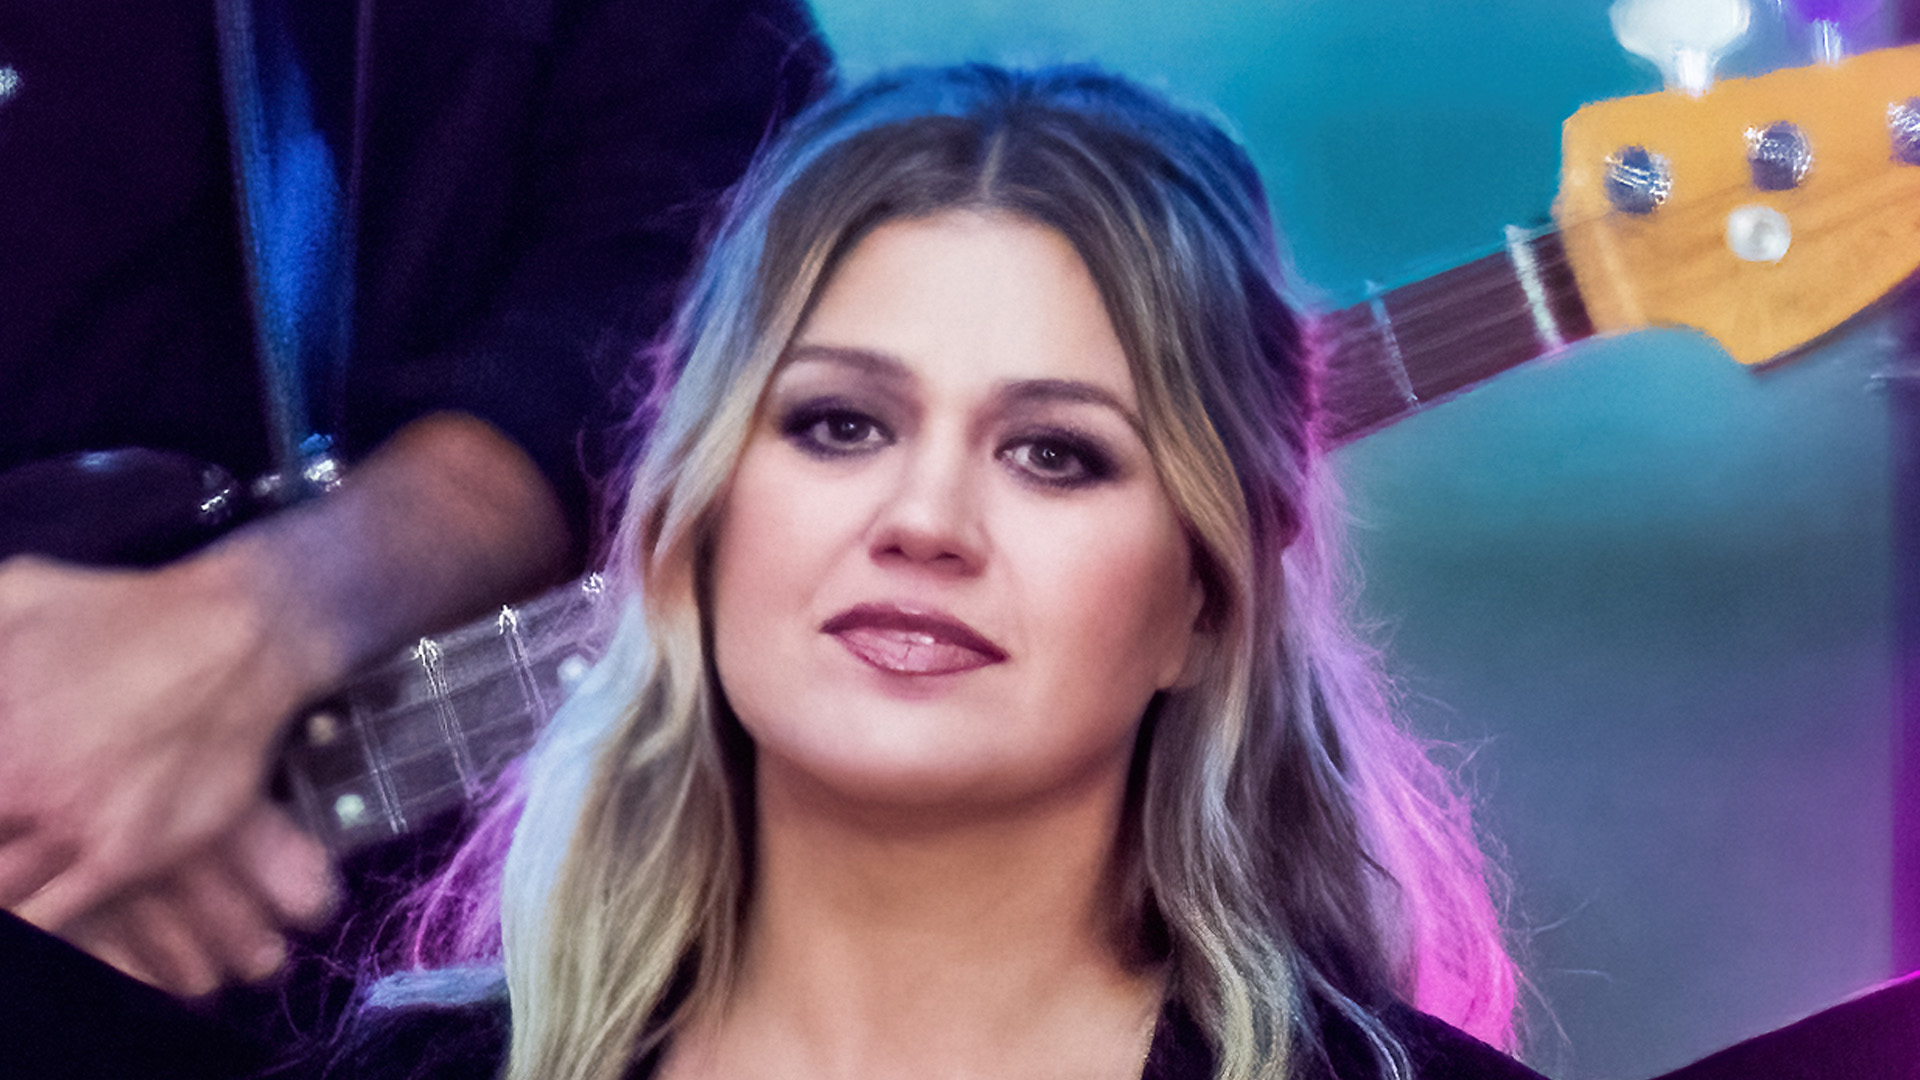 Kelly Clarkson’s ‘foot habit’ reportedly causing tension behind scenes of NBC show in ‘off-putting’ hygiene routine [Video]